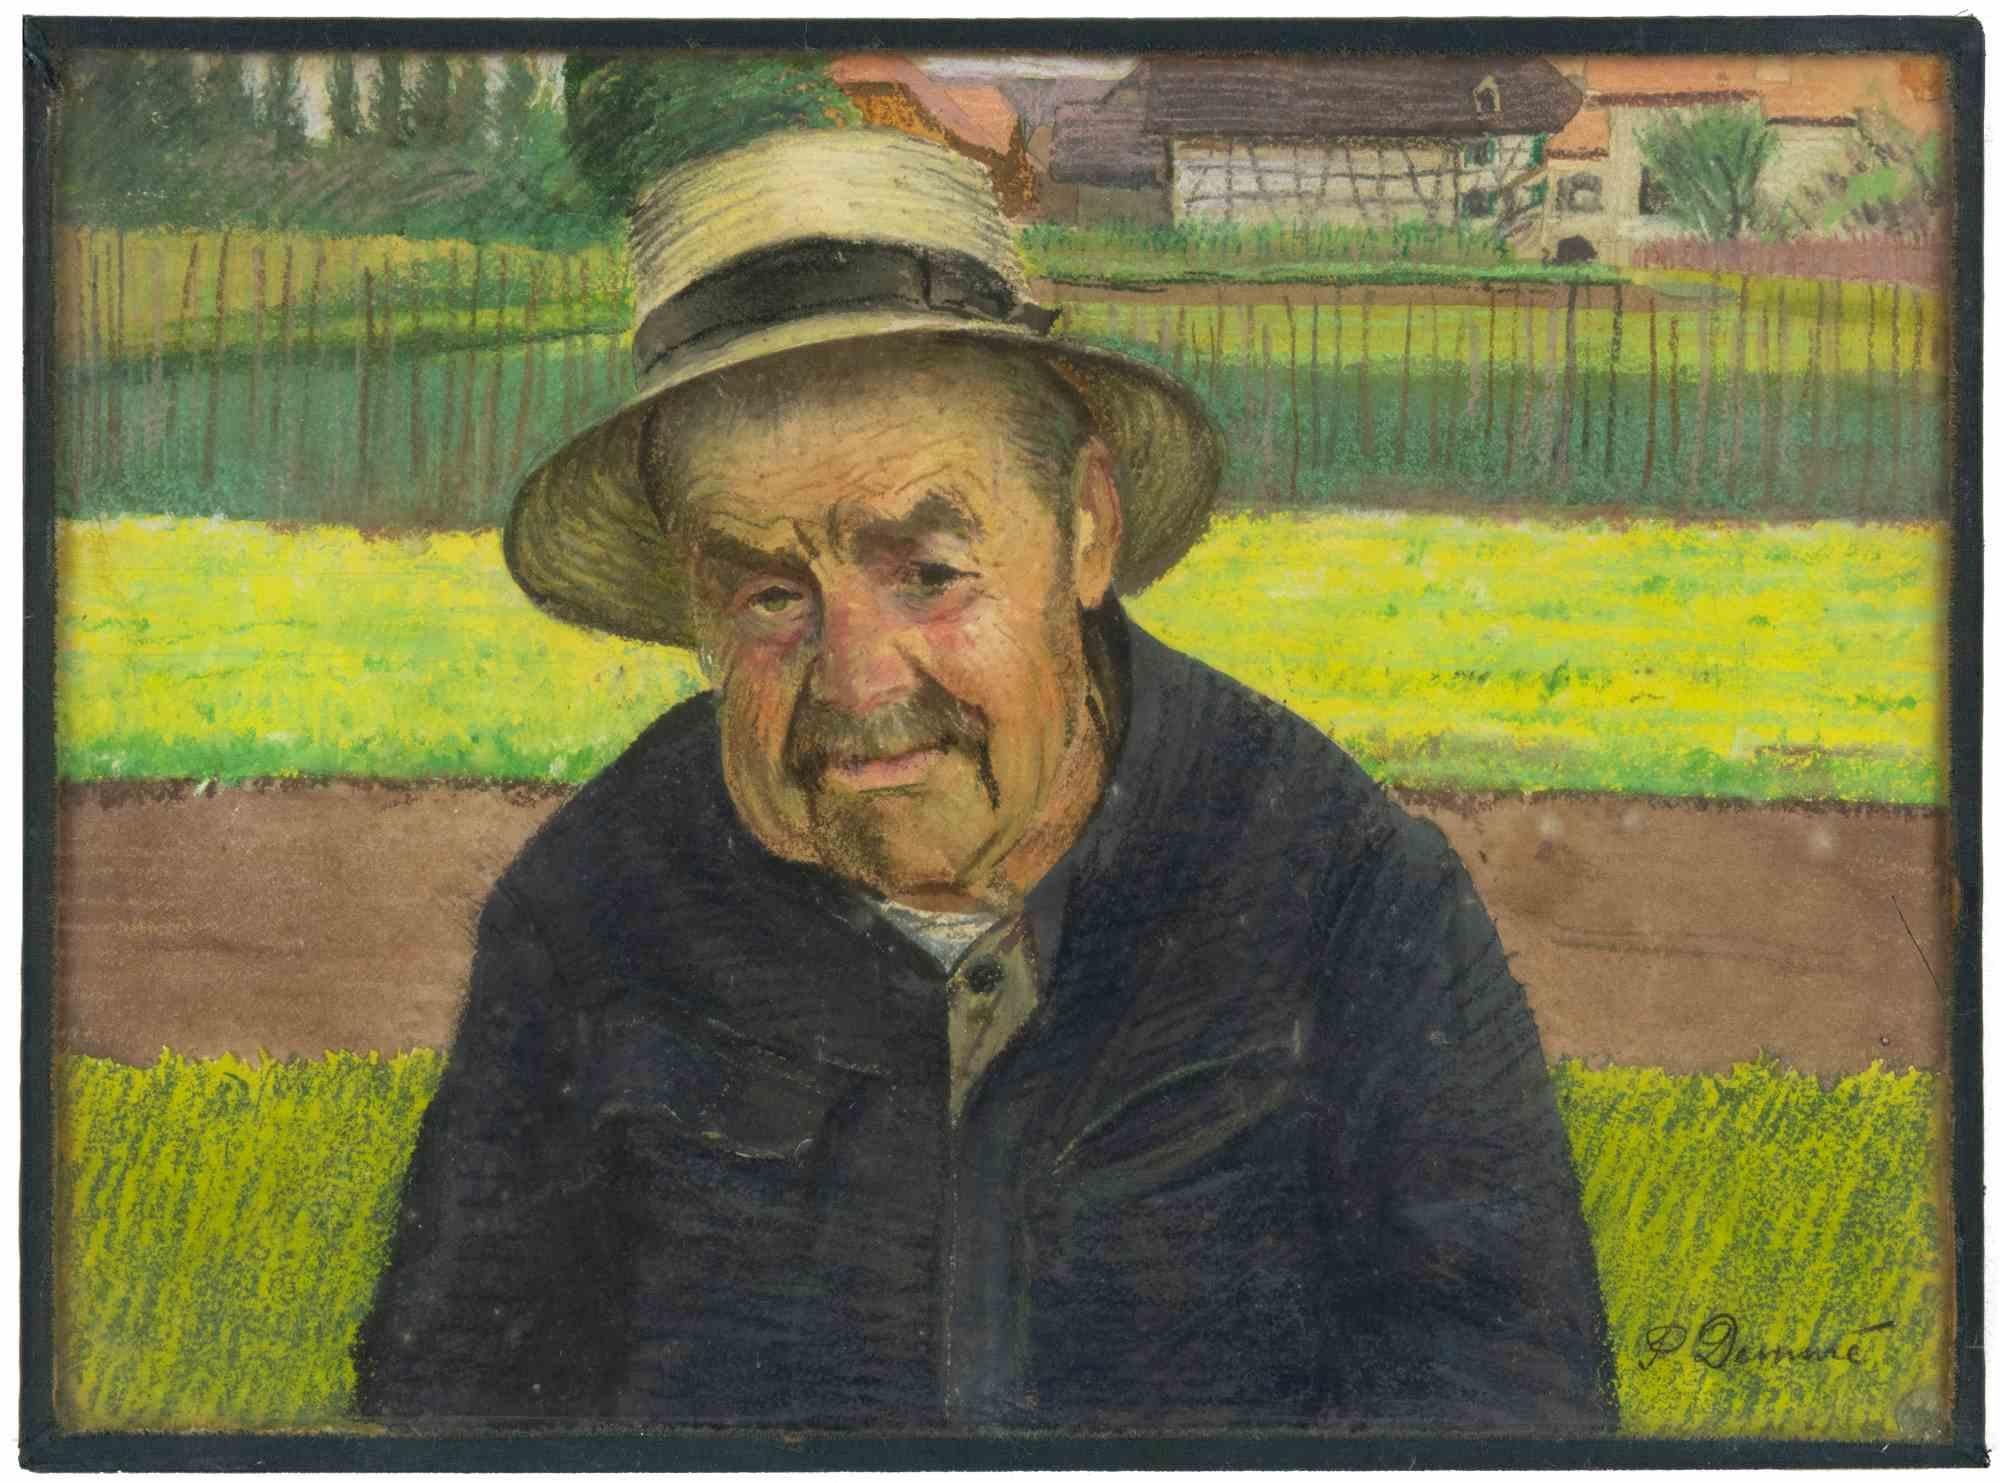 Portrait of man is an original modern artwork realized by Paul Ascan Demmé  (Bern 1866 - 1953 Paris) in the early 20th Century.

Pastel on board.

Hand signed on the lower right margin.

Includes frame.

Hand-written title, signature and technique